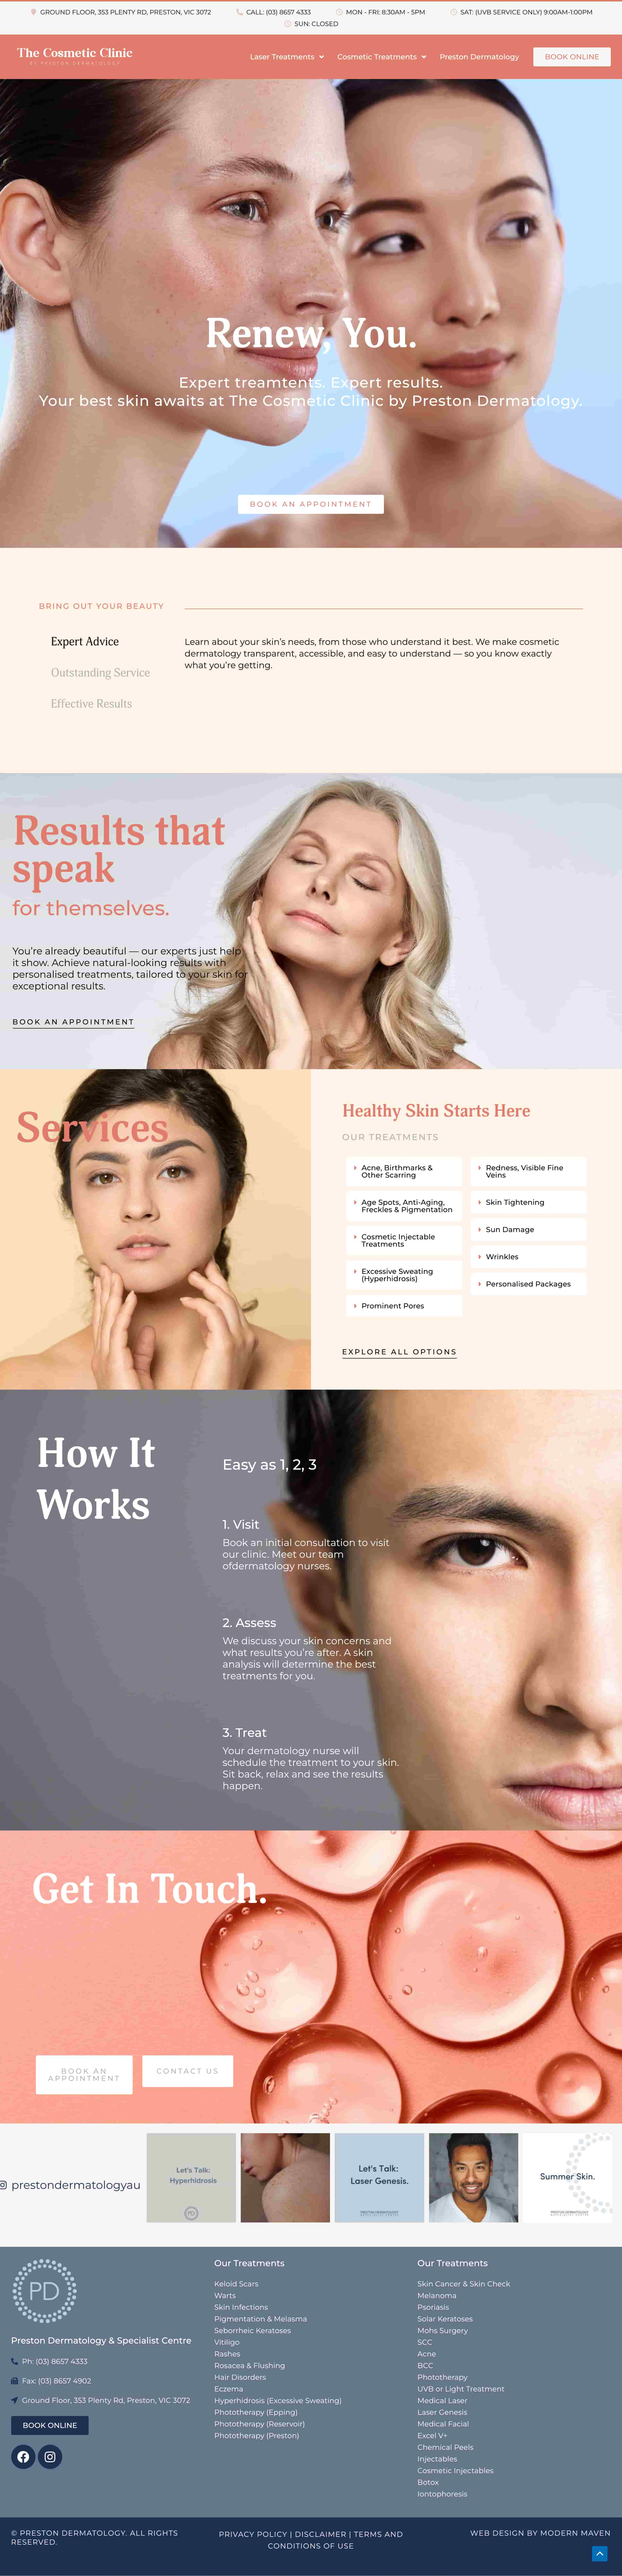 The cosmetic clinic by preston dermatology website copy